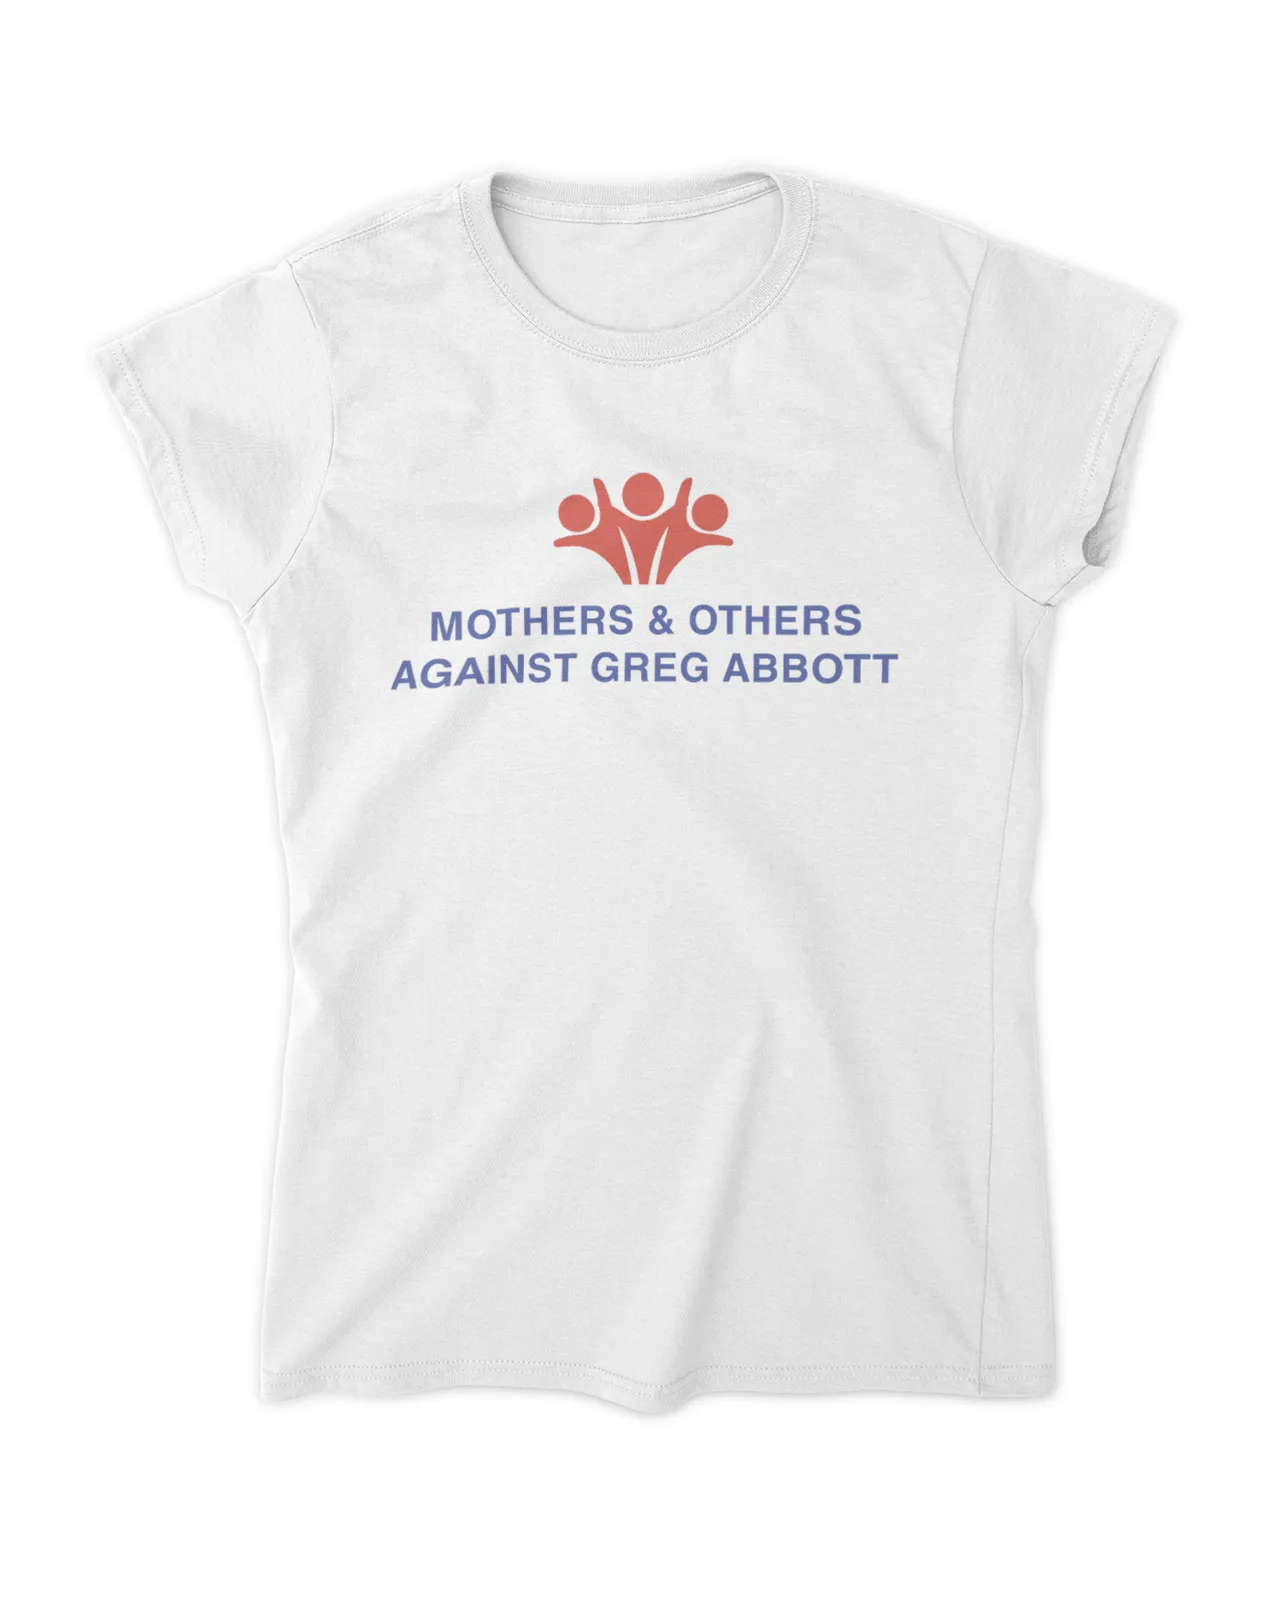 Mothers And Others Against Greg Abbott Shirt